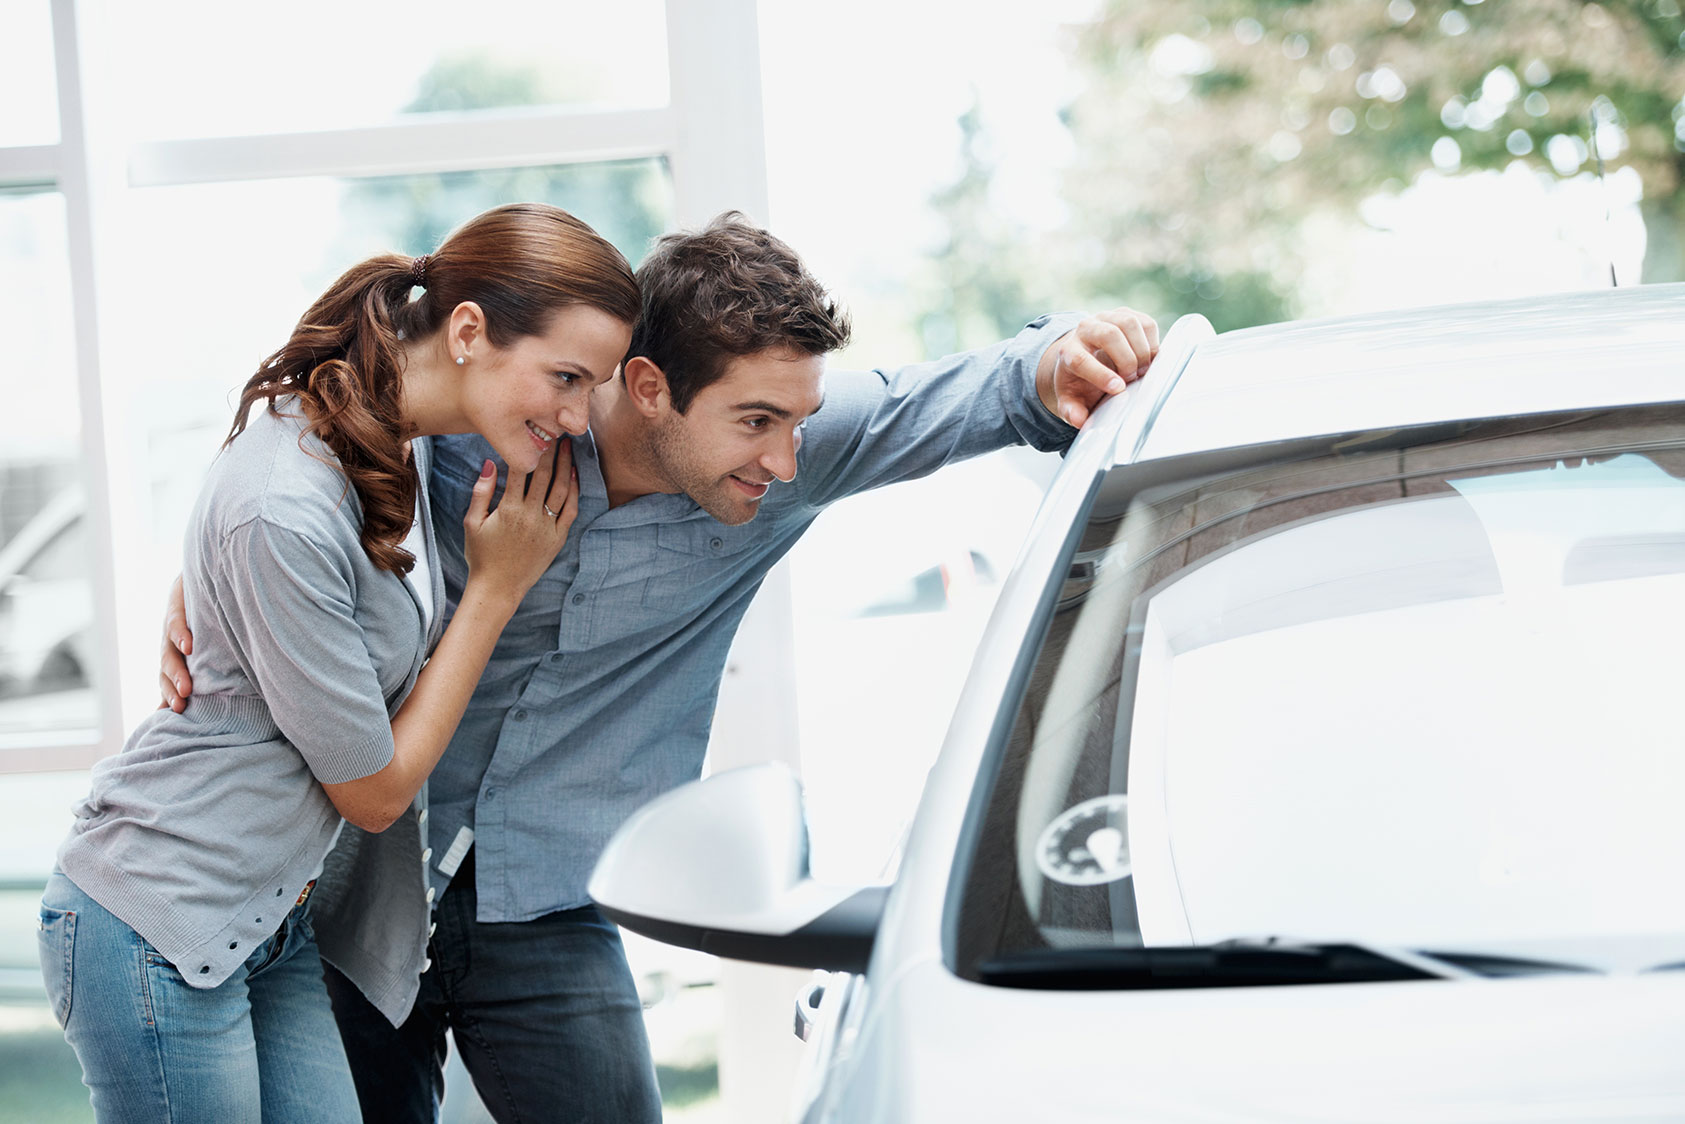 Demystifying the Process: What to Expect at Used Car Dealerships